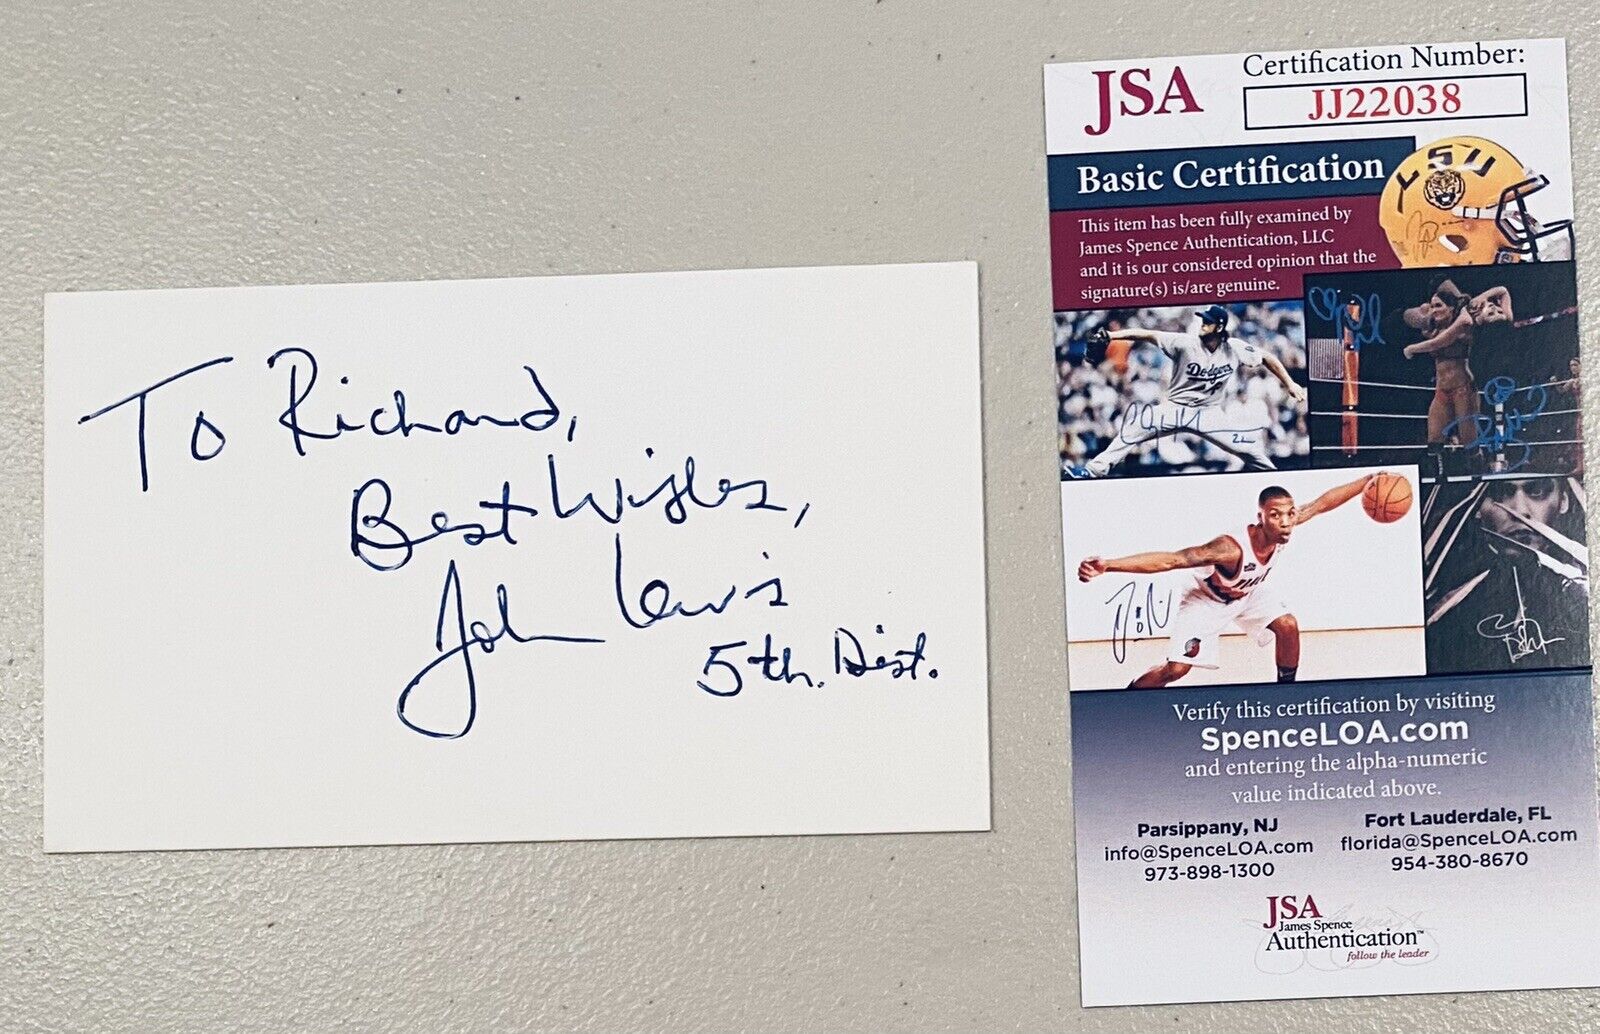 John Lewis Signed Autographed 3x5 Card JSA Certified Civil Rights Activist Selma